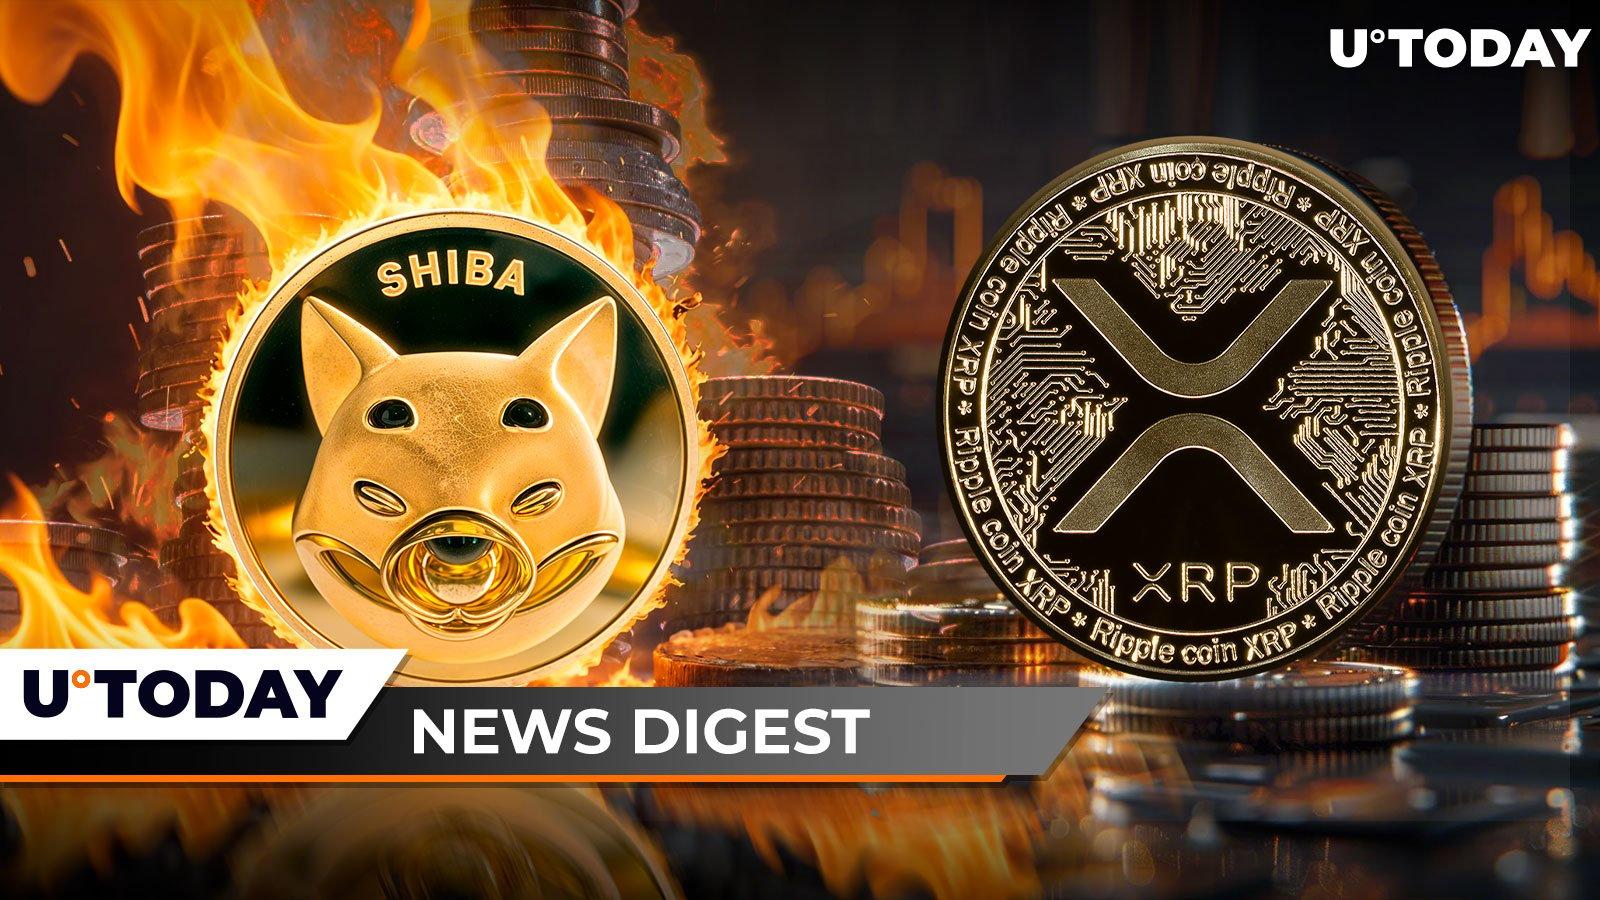 Shiba Inu Burn Rate Skyrockets 545%, 52 Million XRP Shifted in 13 Hours, Toncoin Surges 170% in Volume: Crypto News Digest by U.Today